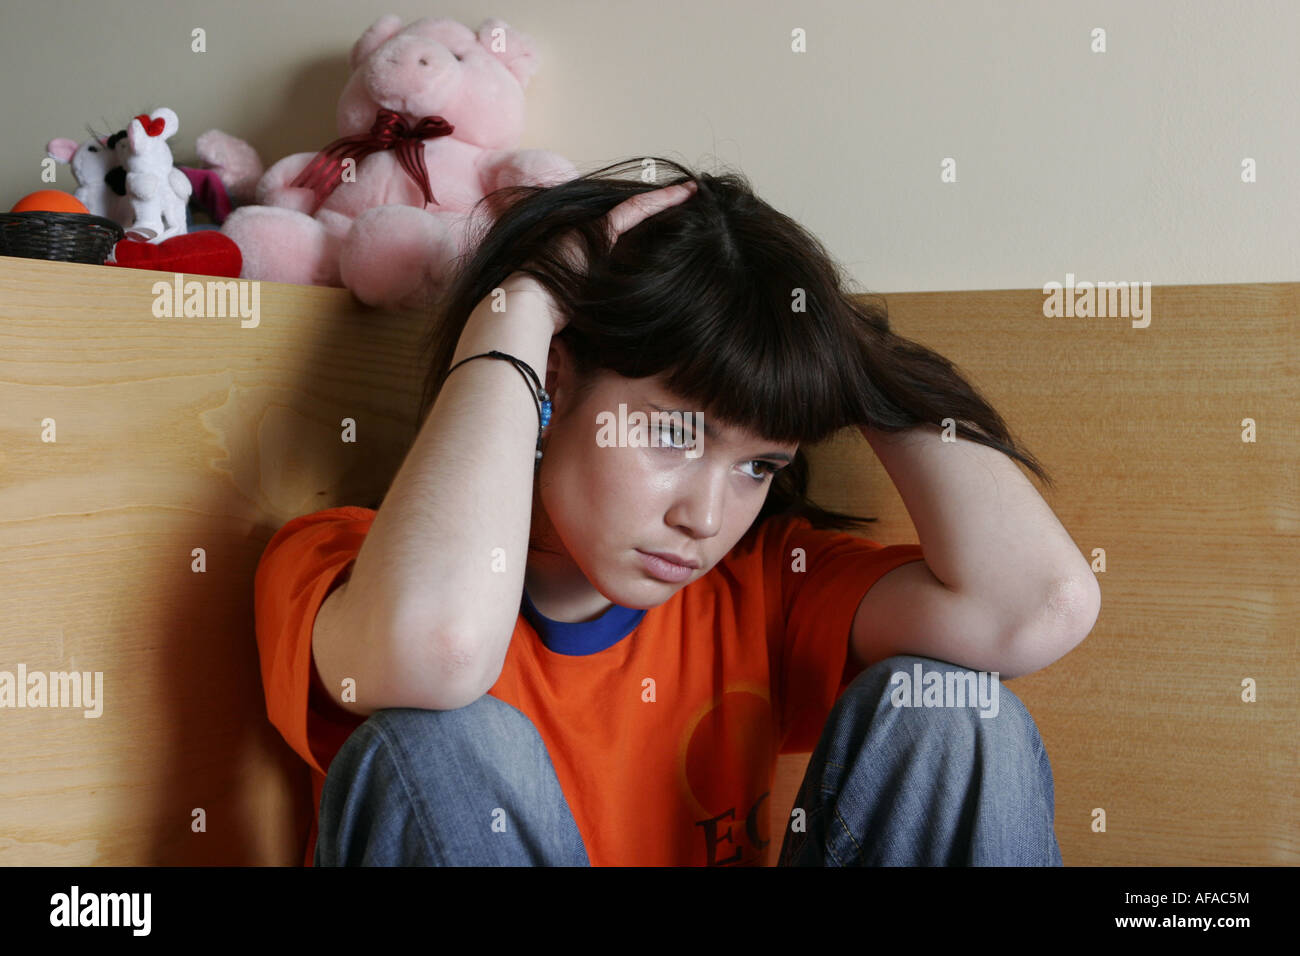 Sad teenager girl sitting on the bed Stock Photo